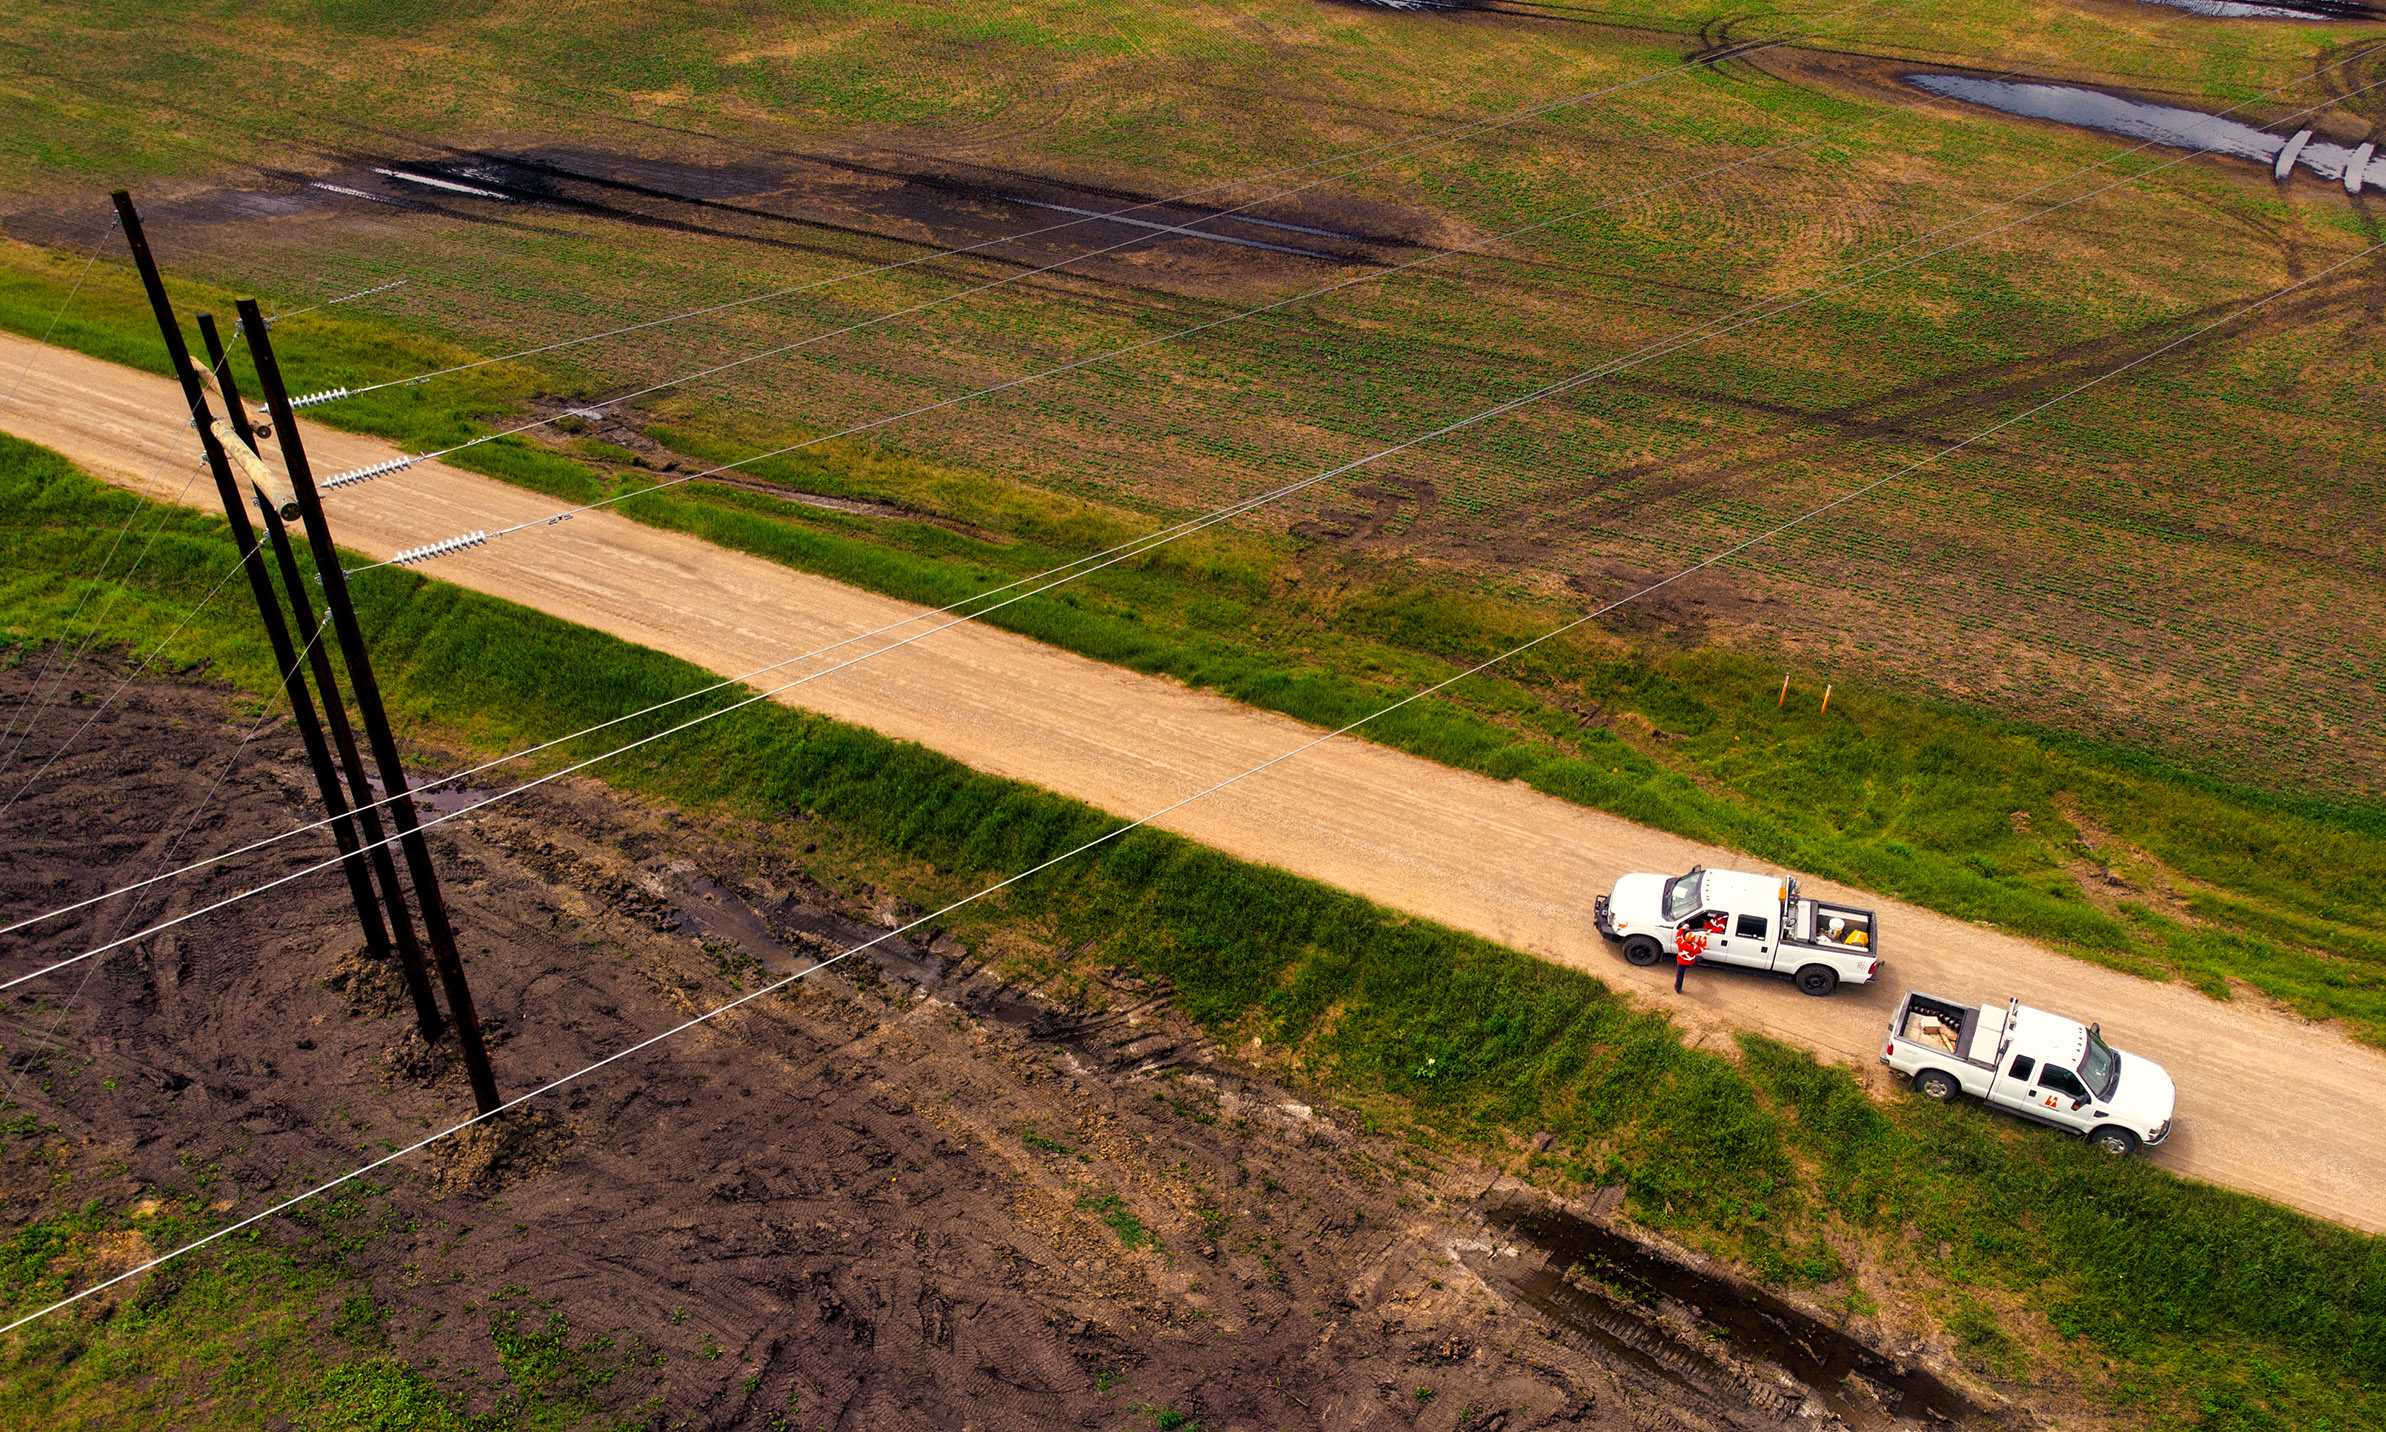 Ariel view of transmission lines with 2 SaskPower trucks on a grid road